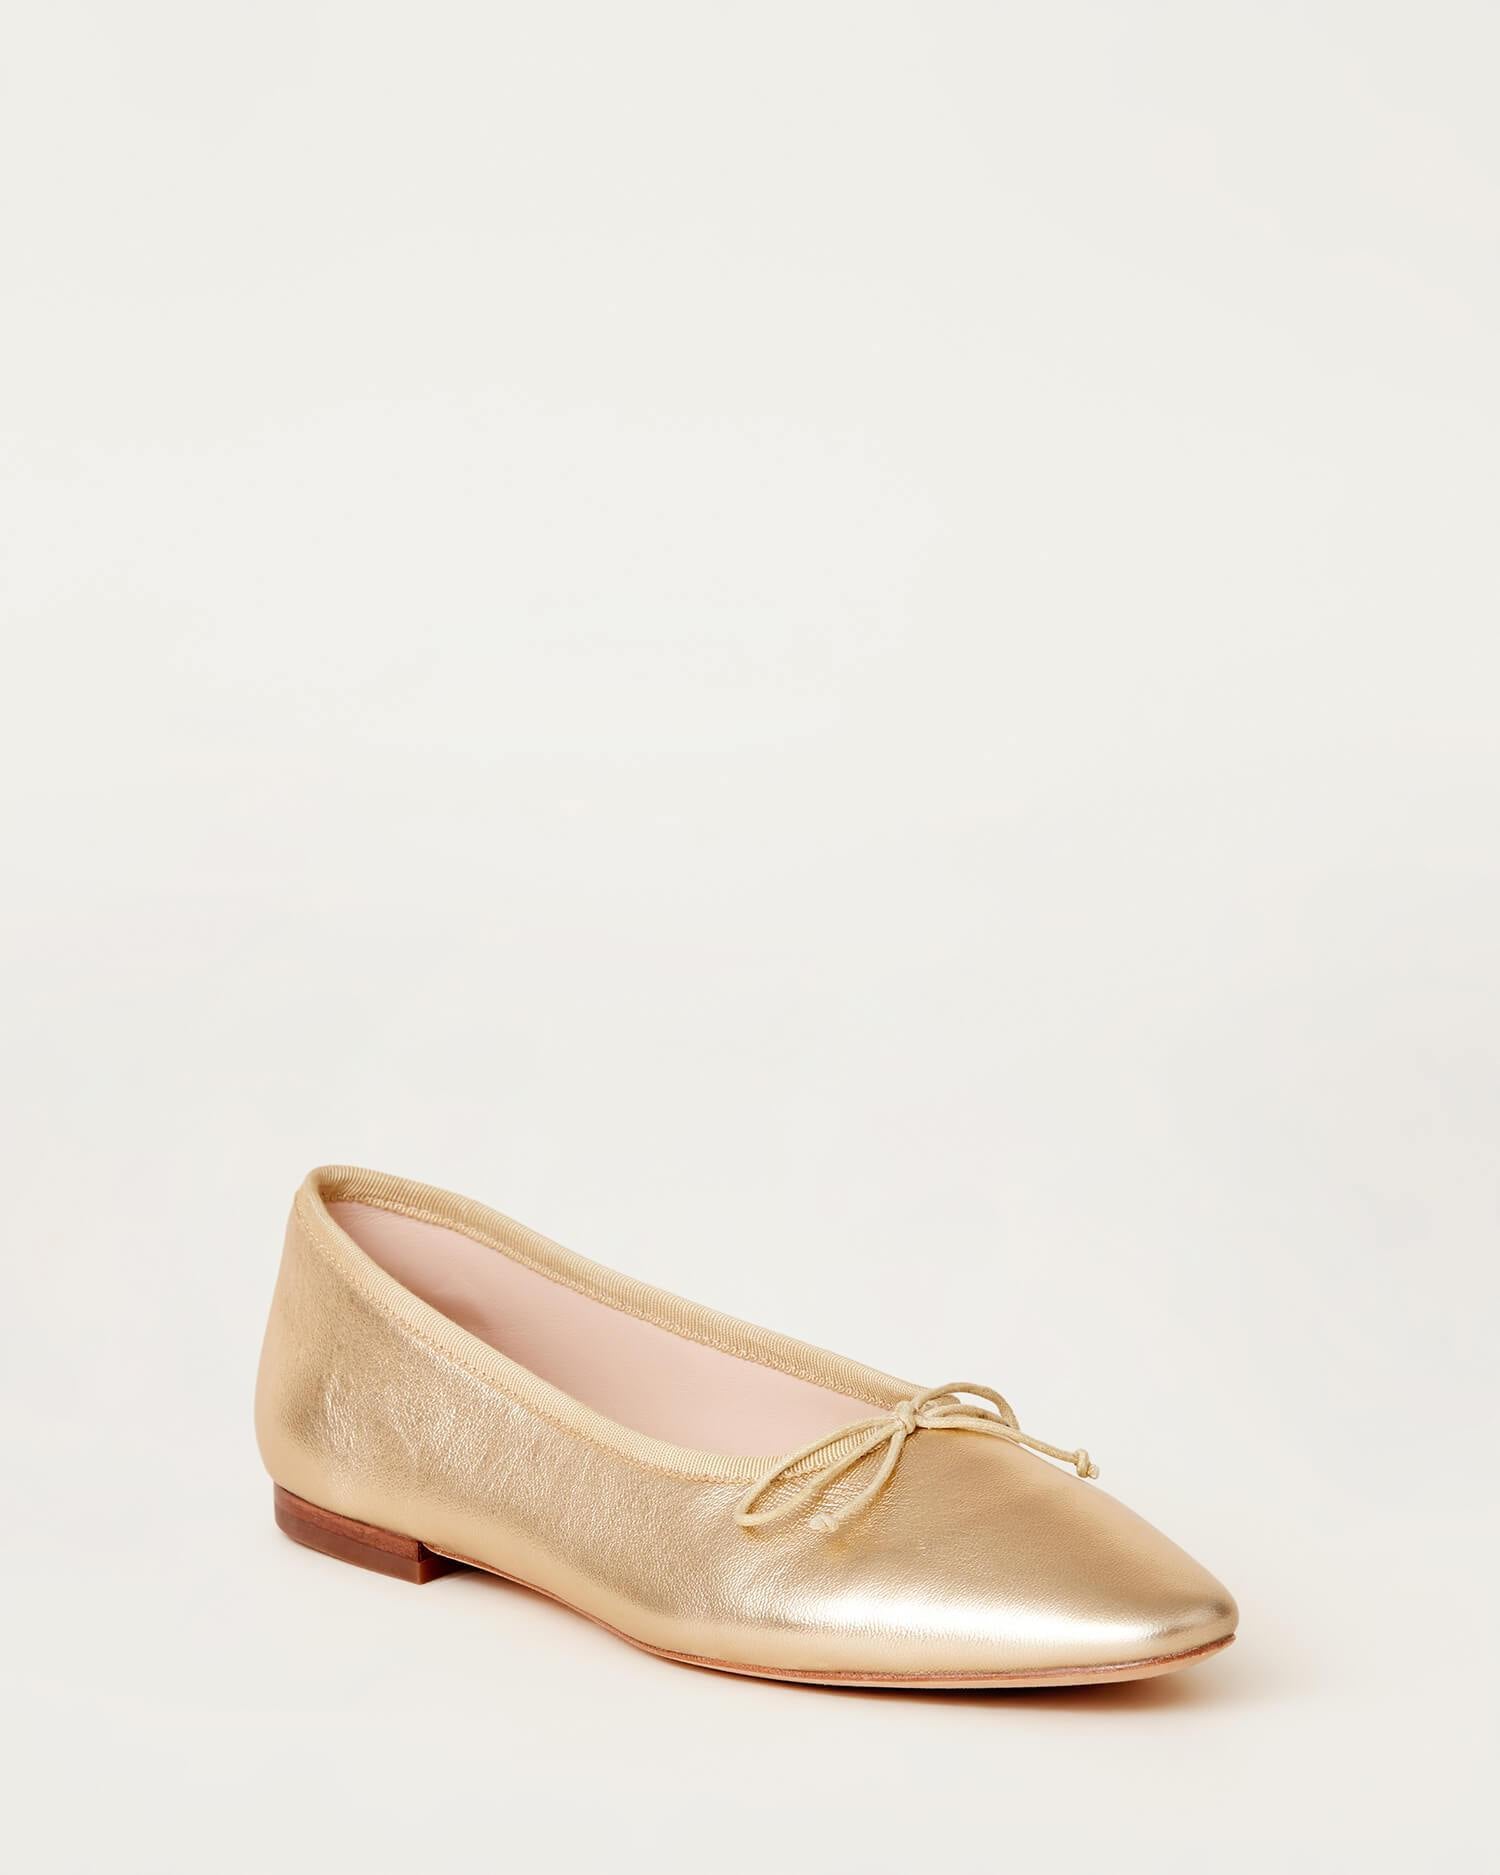 champagne color flats